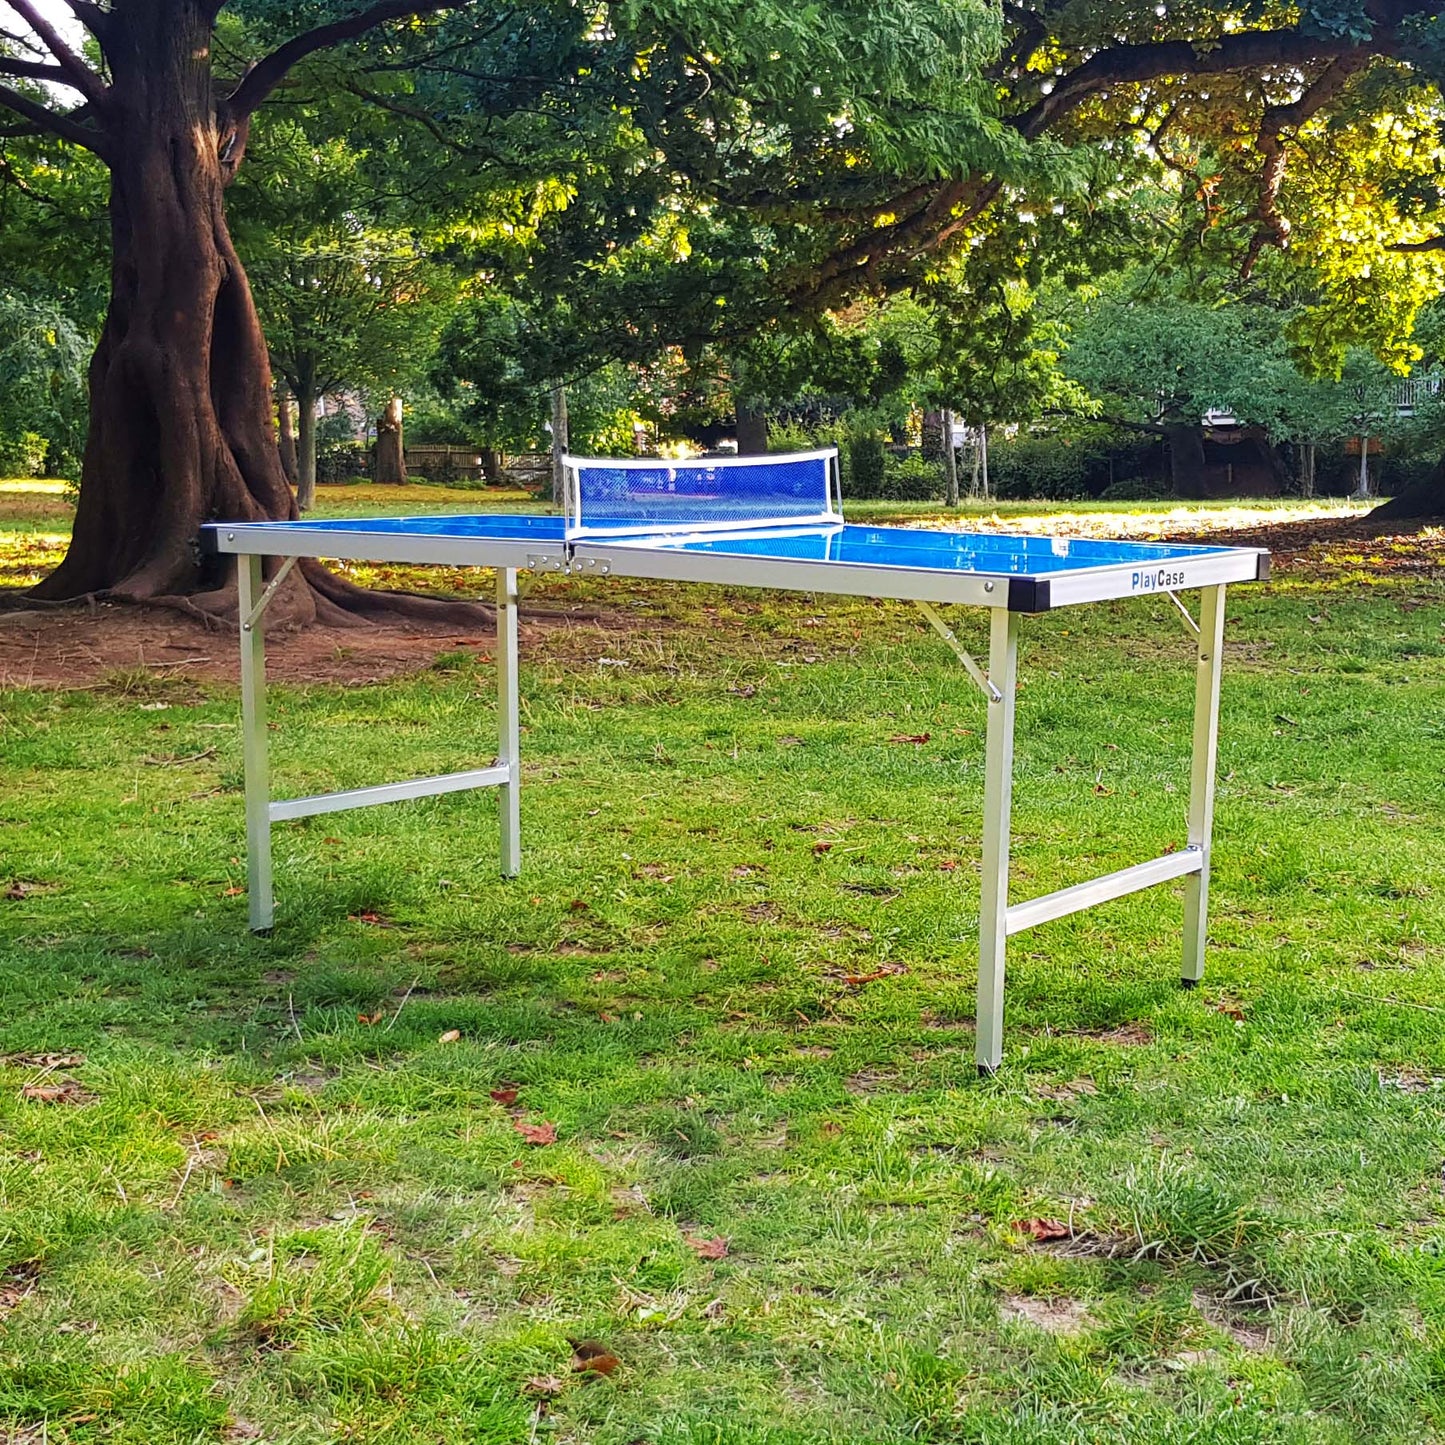 |Viavito PlayCase 5ft Outdoor Folding Table Tennis Table - Lifestyle 3|